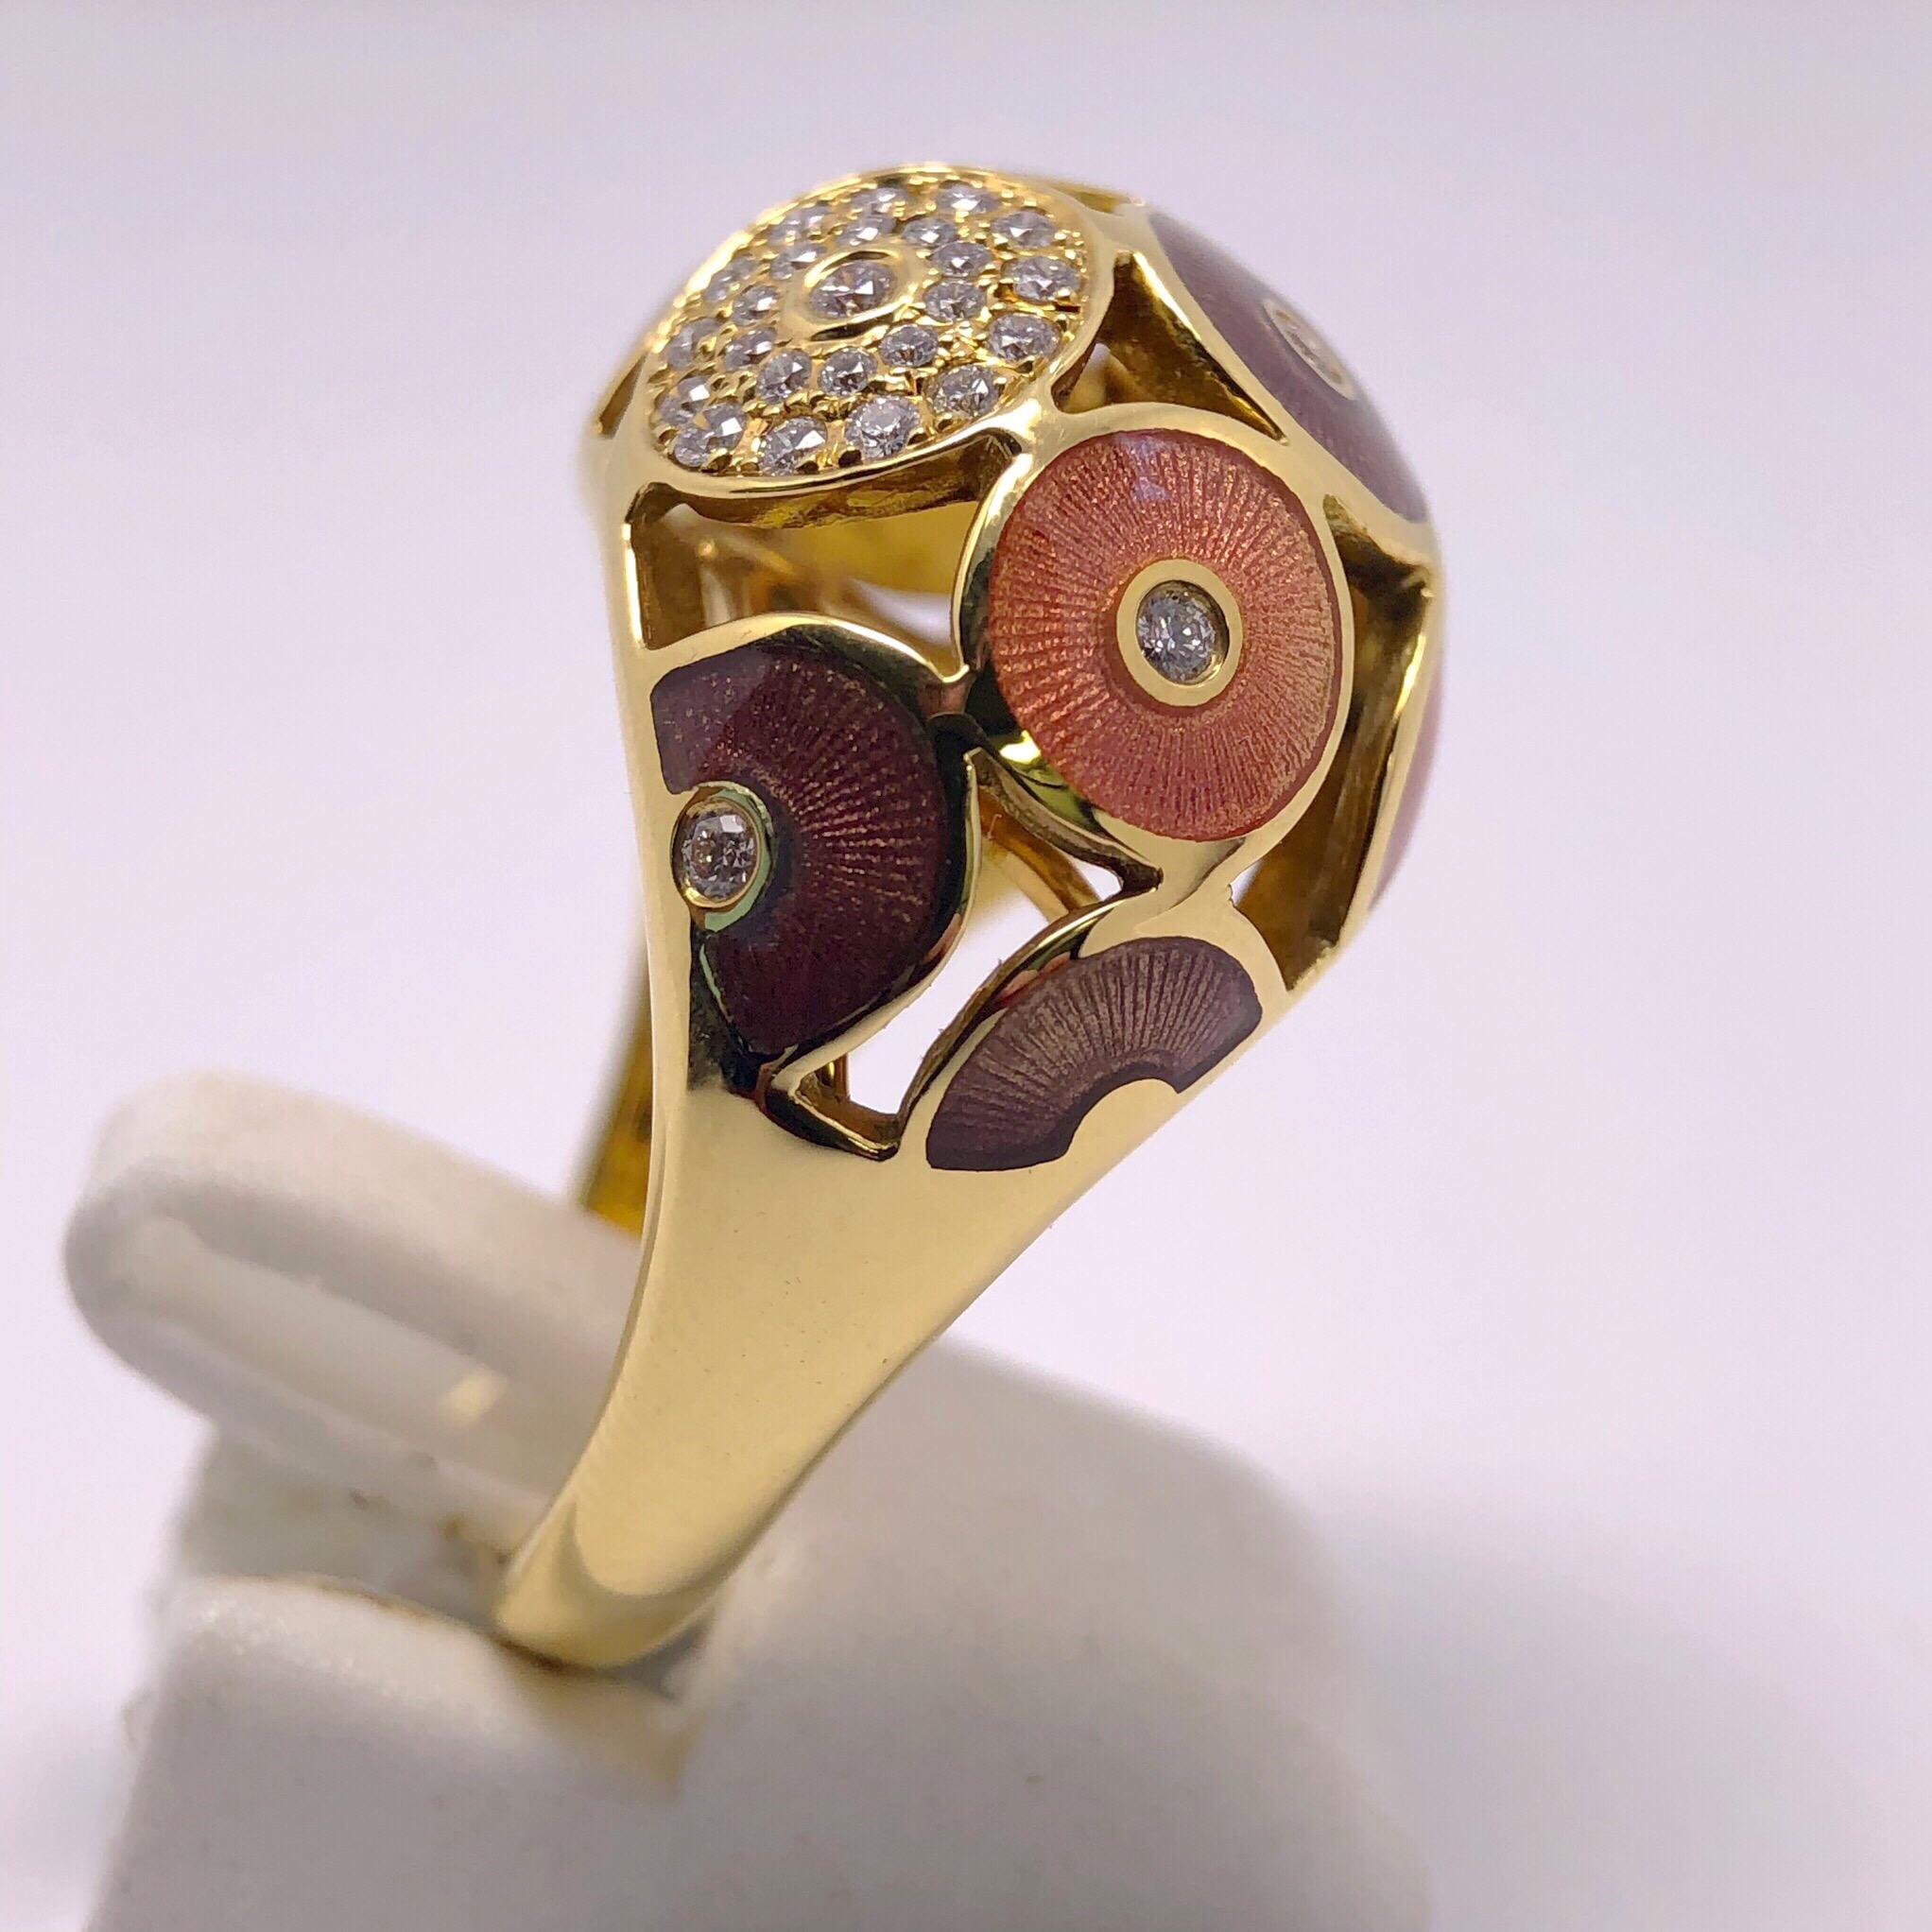 This Modern 18 karat yellow gold Faberge dome ring by Victor Mayer, features an array of circles, some of which are completely diamonds while others are composed of purple and orange Guilloché enamel which are  detailed with a single diamond center.